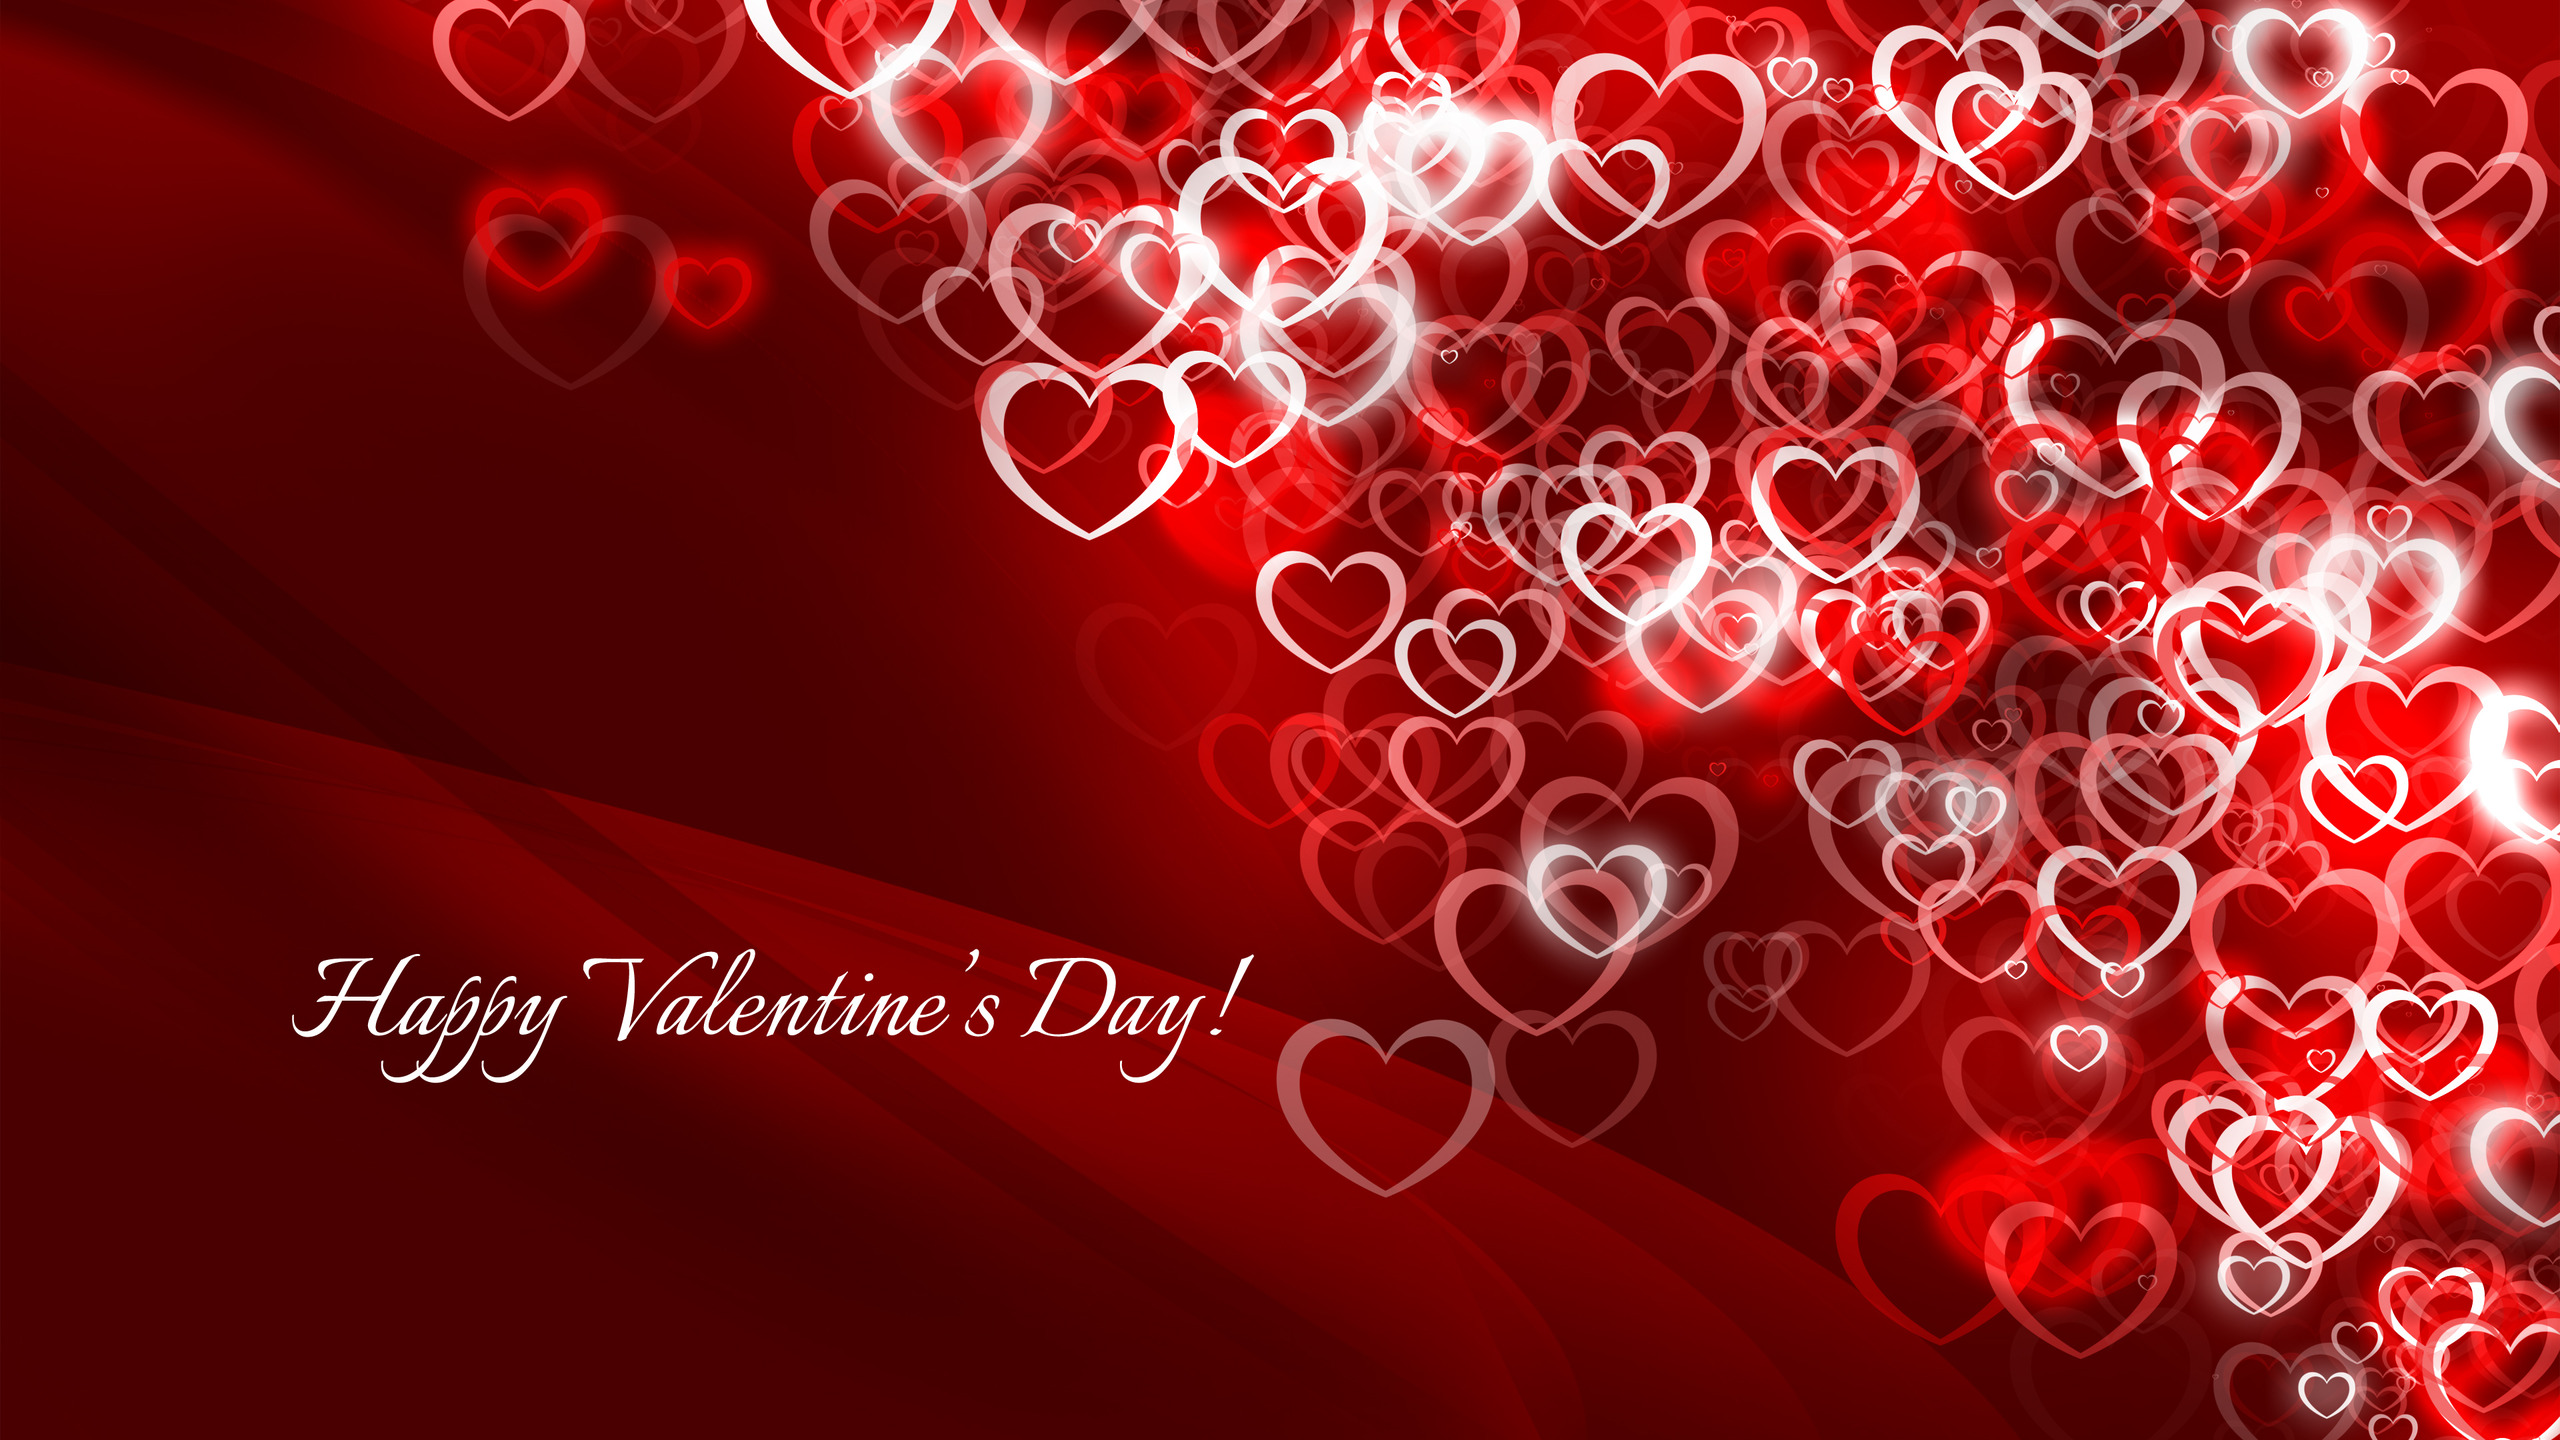 Happy Valentines Day Greeting Free Wallpaper